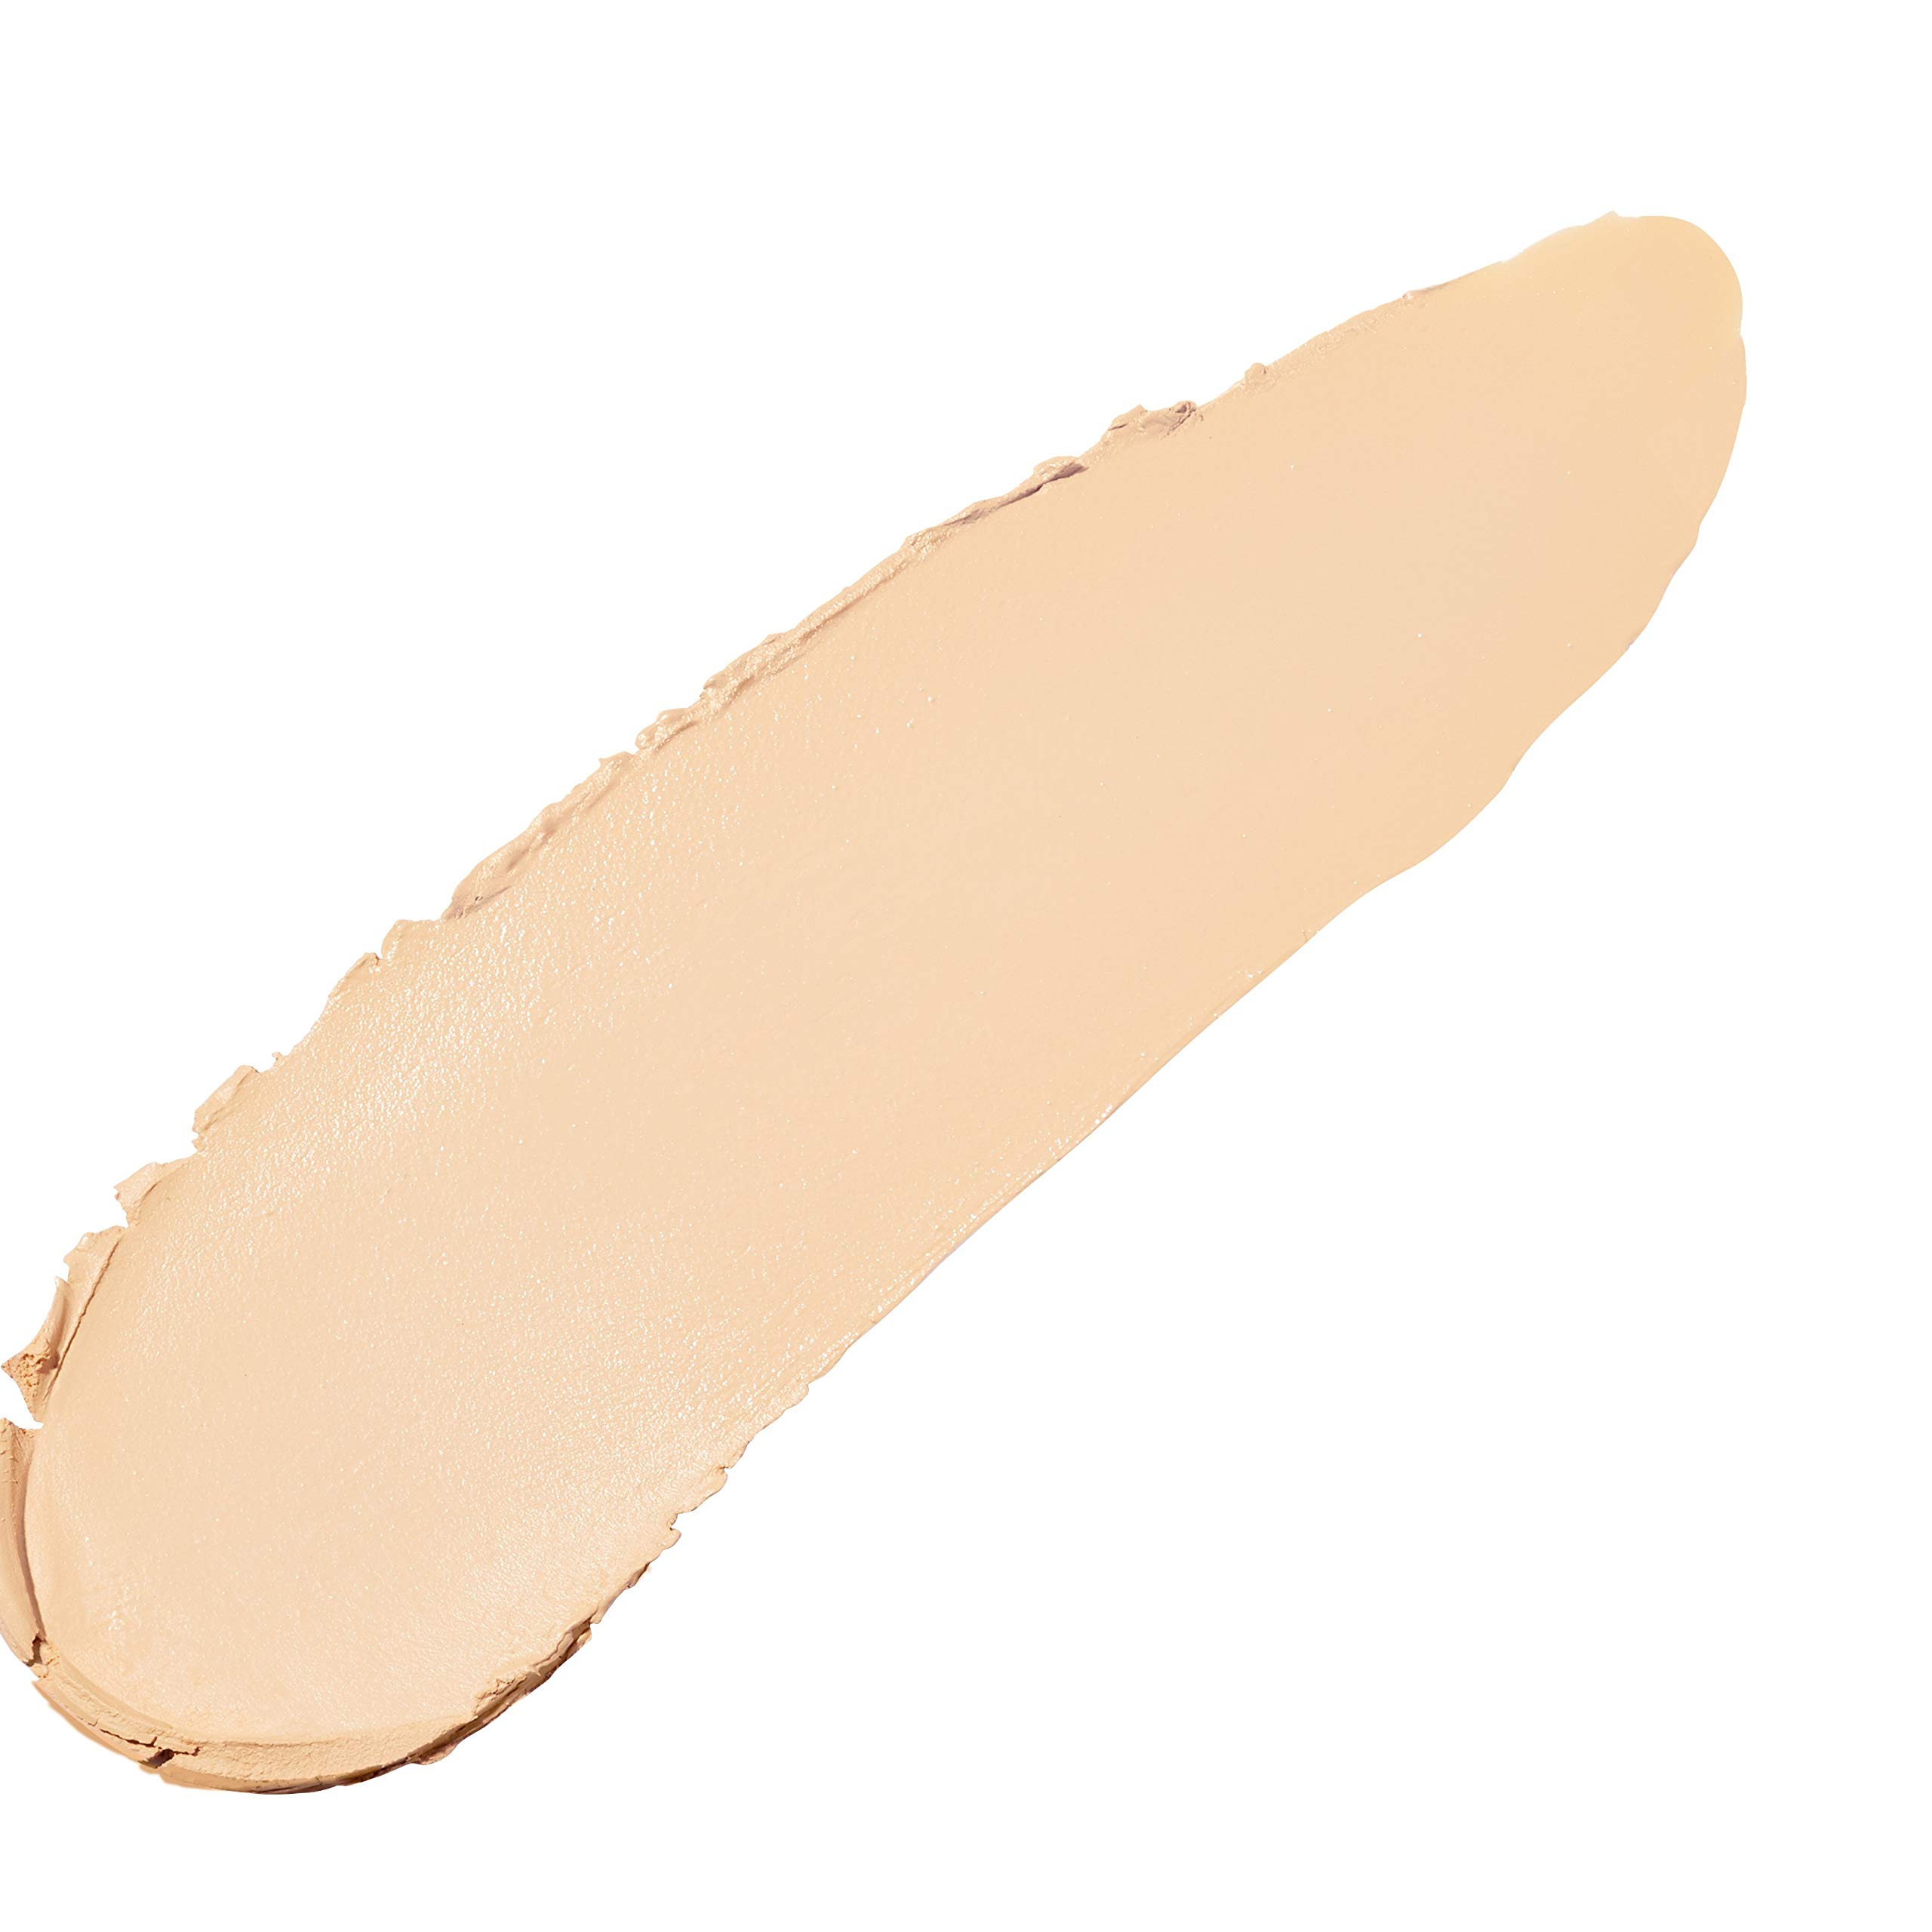 Neutrogena Hydro Boost Hydrating Foundation Stick with Hyaluronic Acid, Oil-Free & Non-Comedogenic Moisturizing Makeup for Smooth Coverage & Radiant-Looking Skin, Classic Ivory, 0.29 oz